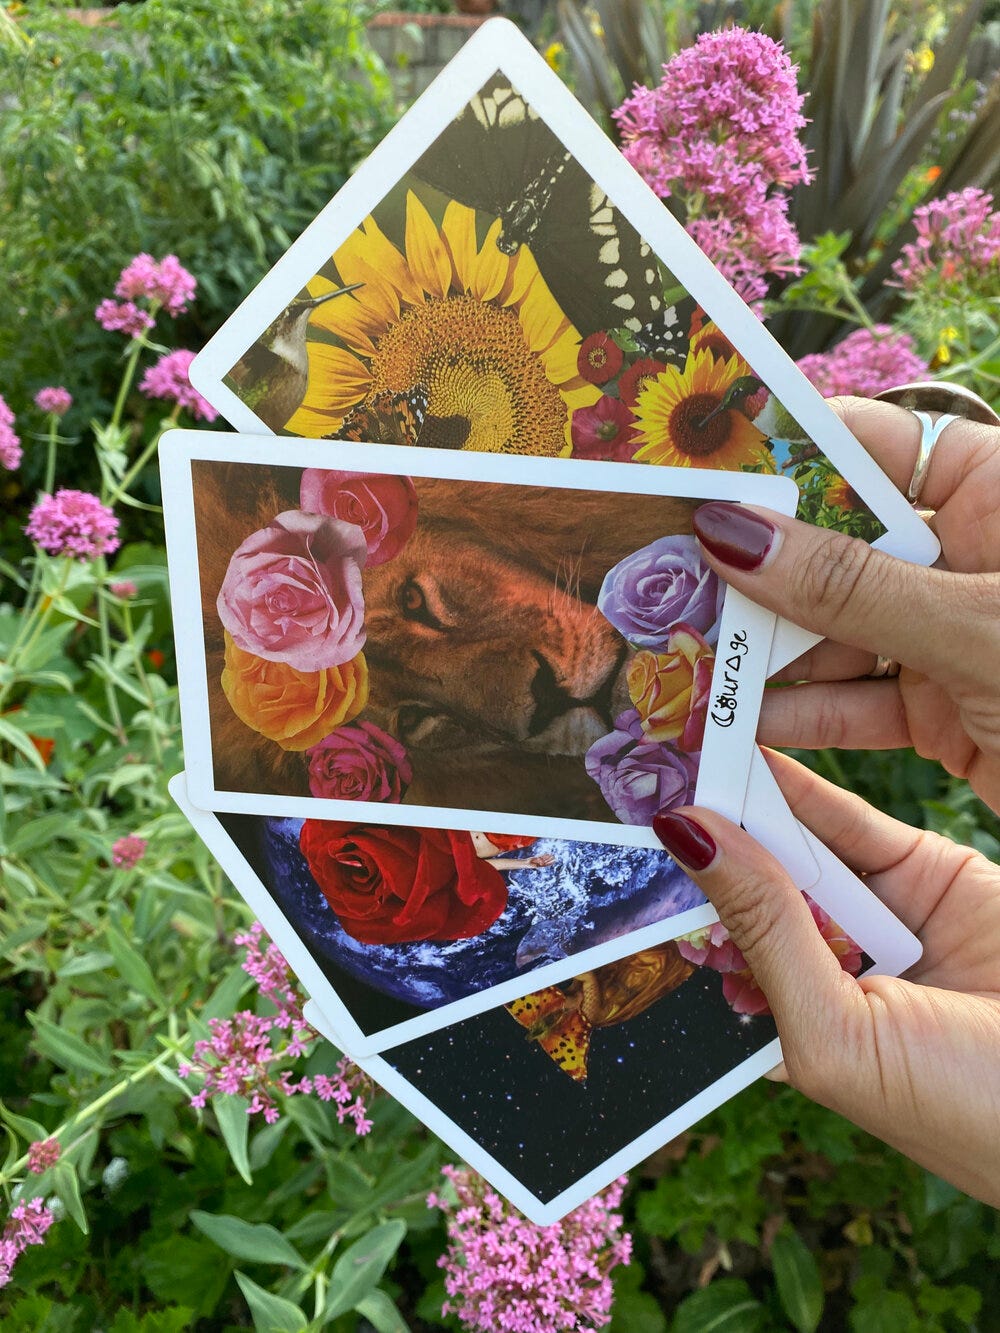 Various cards are held out from the Vision of the Muse tarot deck. The top card you can see is the Courage card, which features a photo of a lion surrounded by multicolored roses.